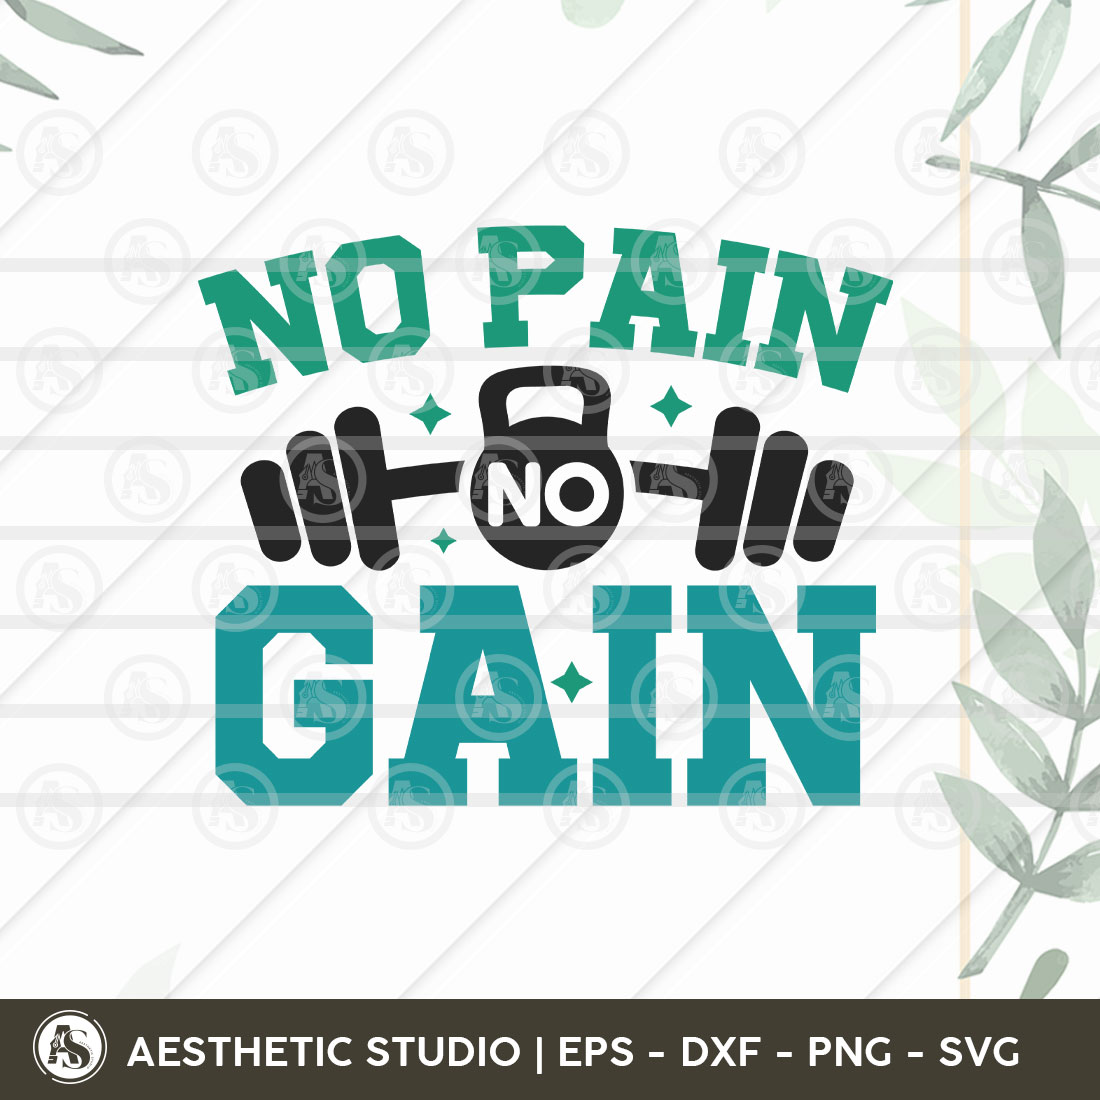 Gym Svg, No Pain No Gain Svg, Workout, Fitness, Weights, Gym Shirt Svg, Gift For Gym Lover, Gym Png Cut Files, Dxf, Svg, Eps cover image.